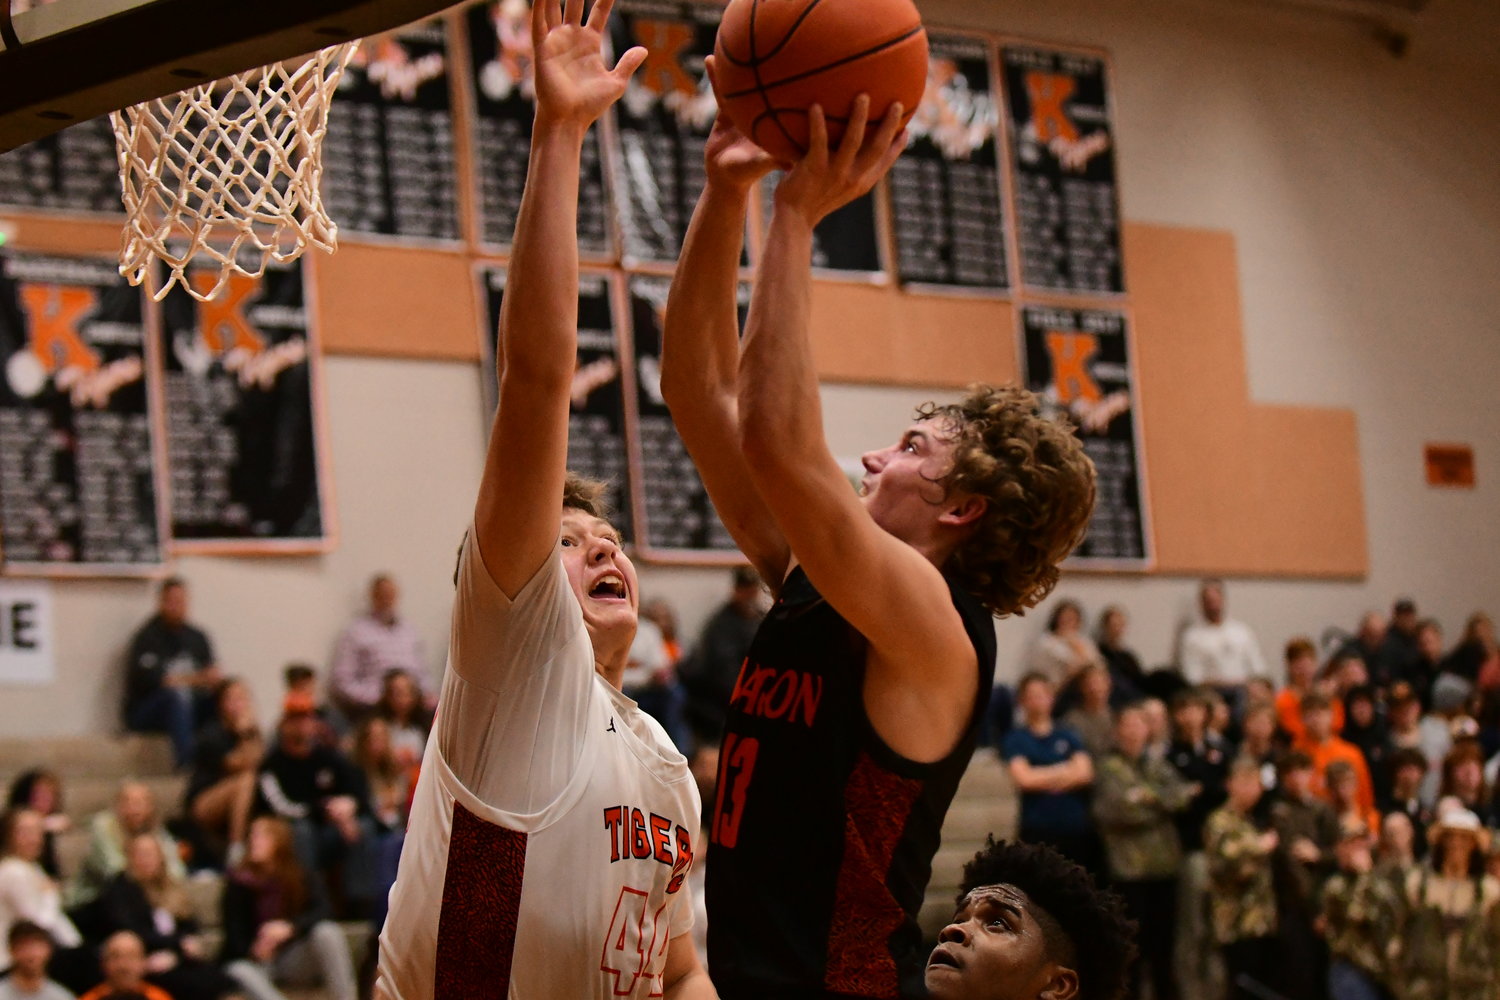 Action from Tuesday's boys basketball game between Kirksville and Macon.